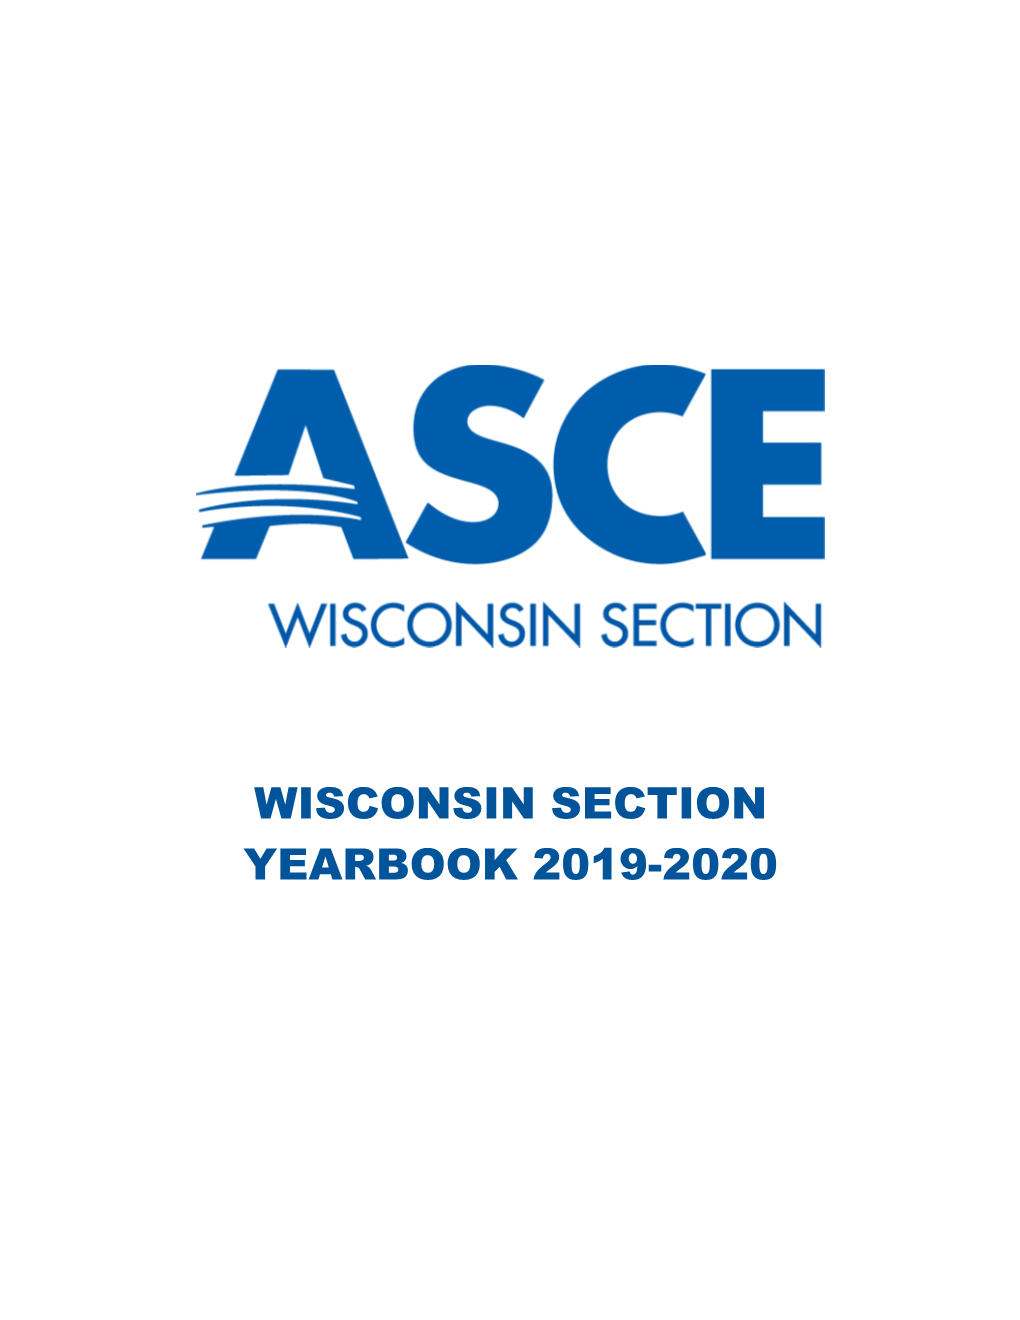 Wisconsin Section Yearbook 2019-2020